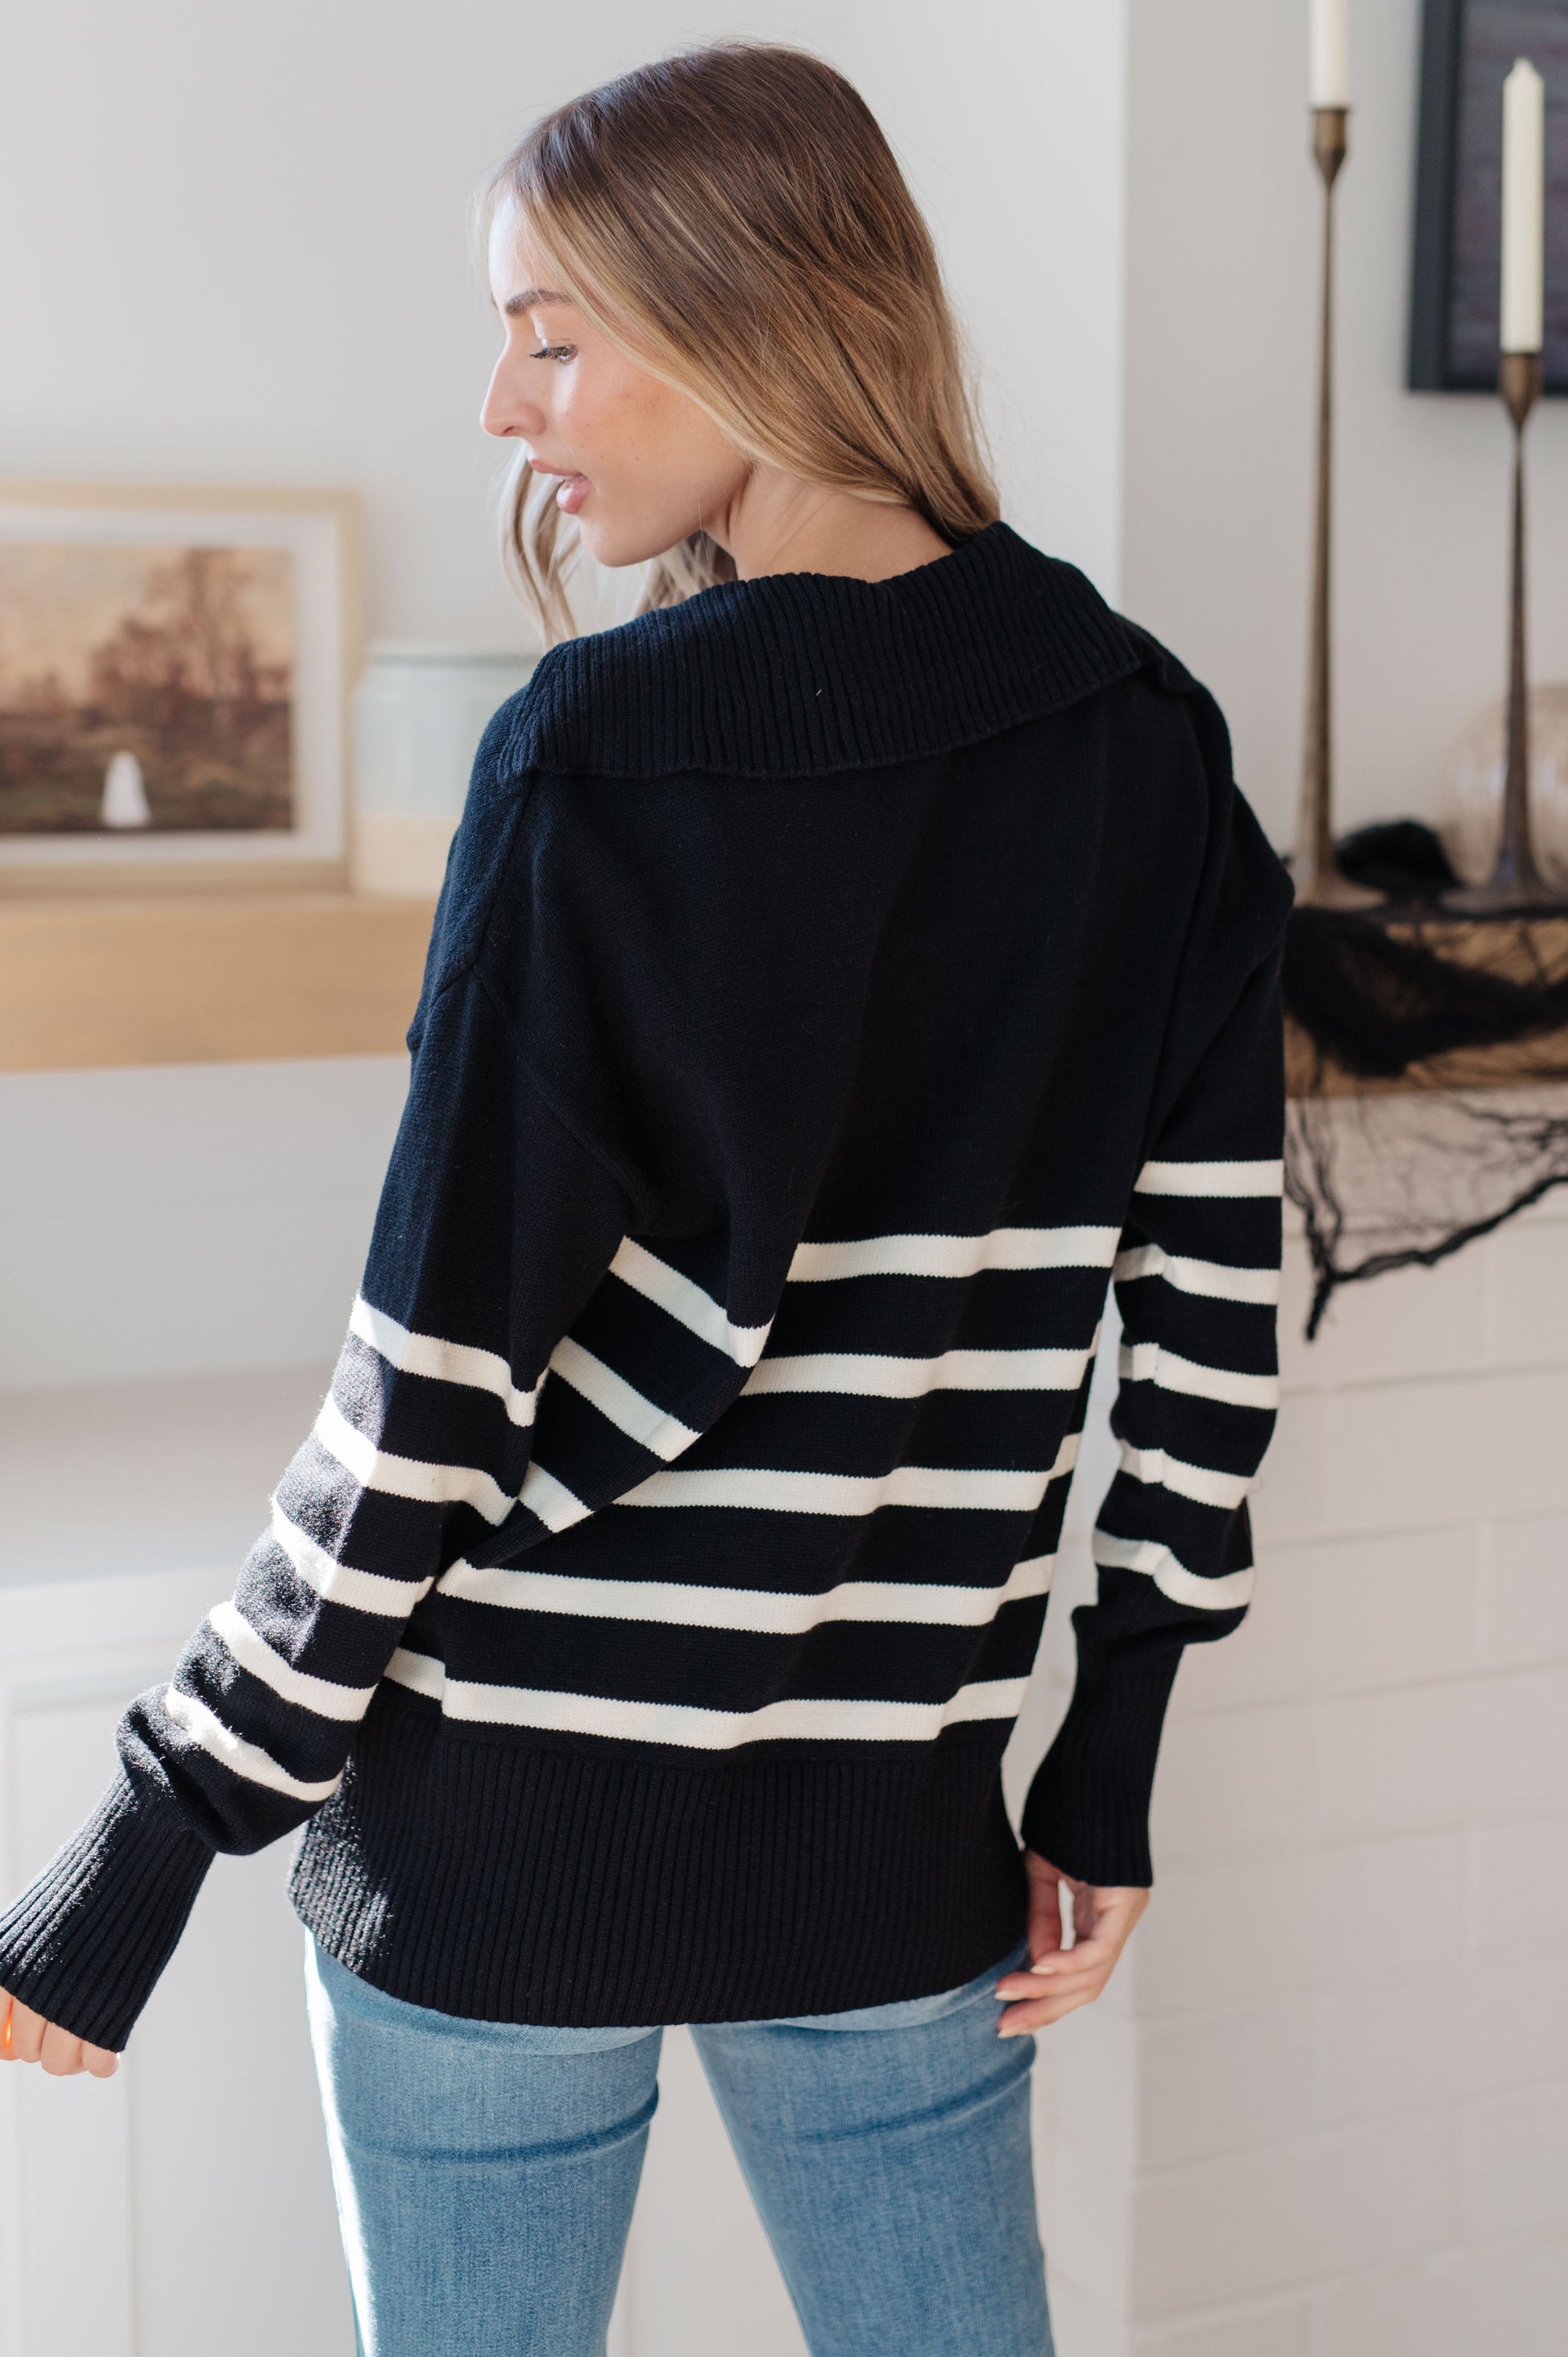 From Here On Out Striped Sweater - Jodifl